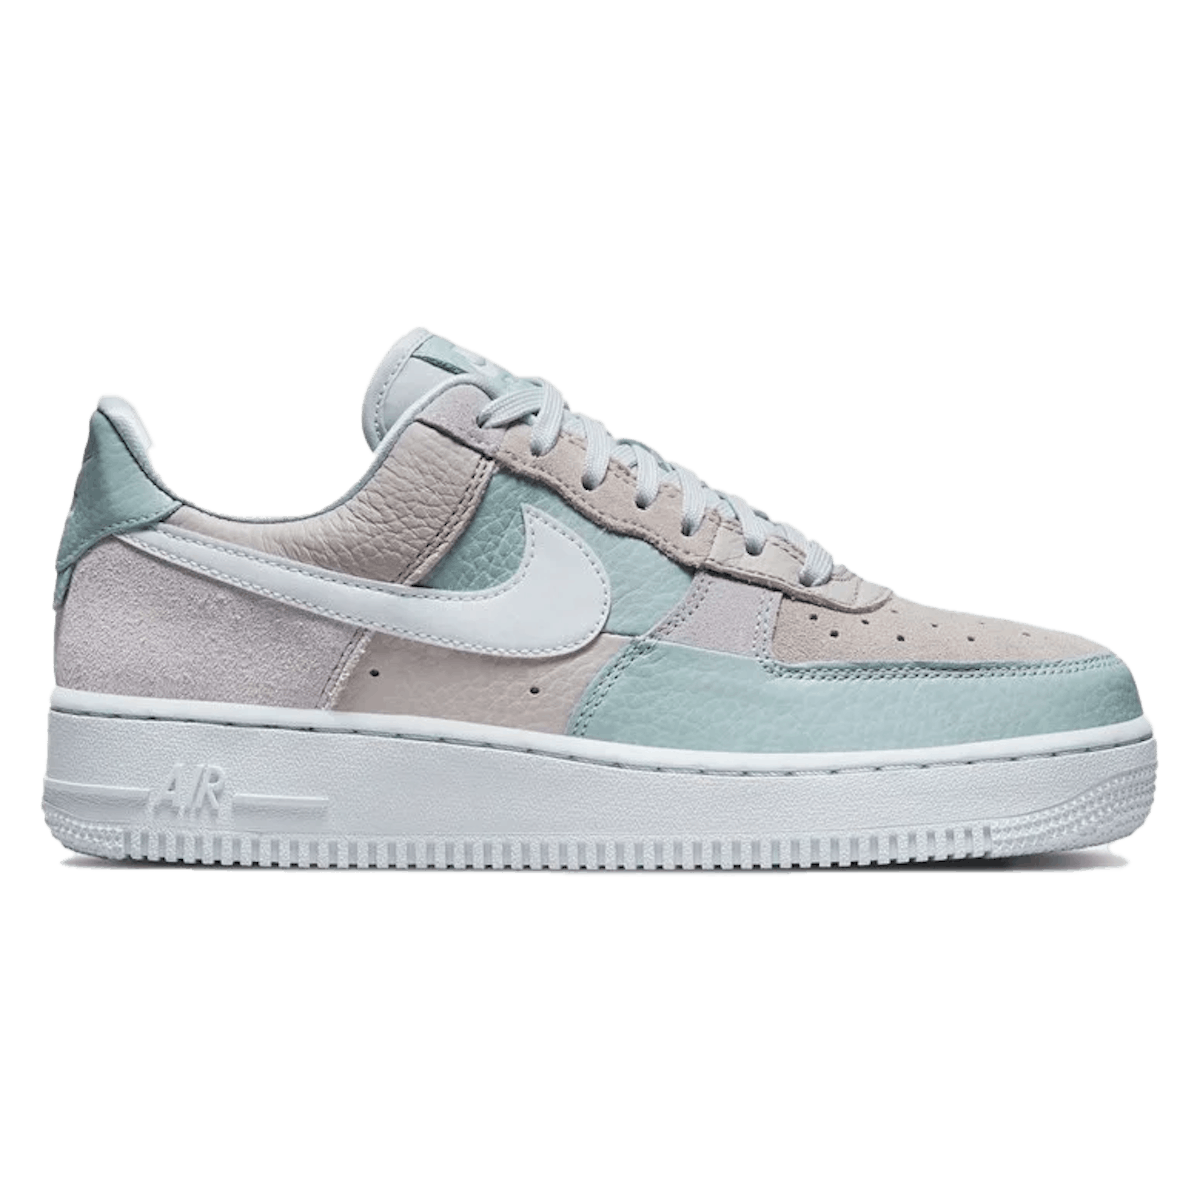 Nike Air Force 1 '07 Low "Be Kind"